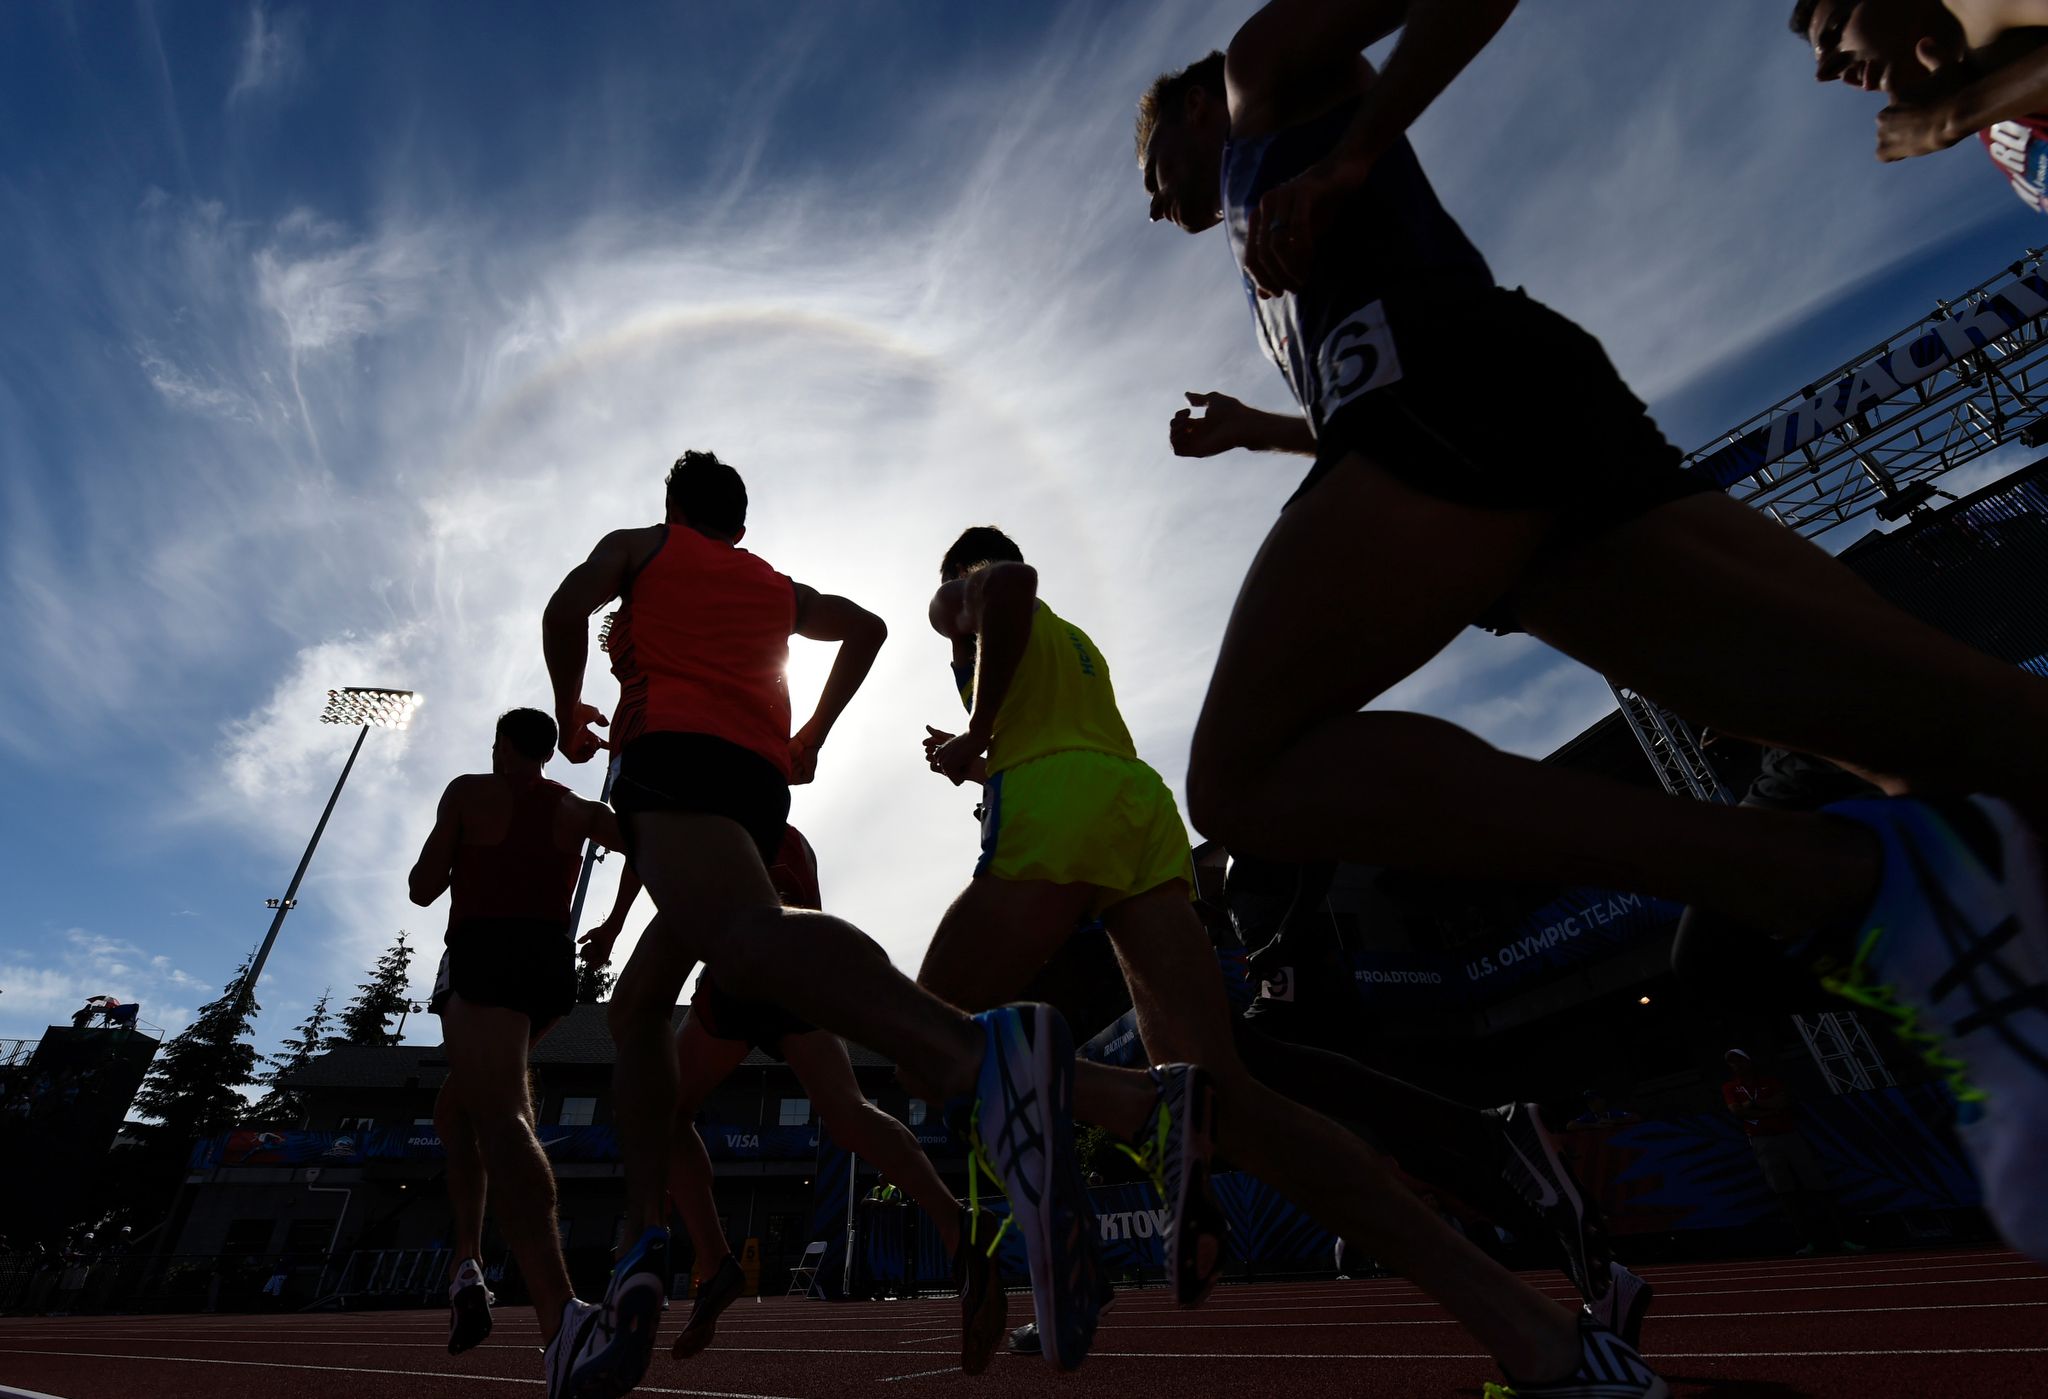 5,000 meters U.S. Olympic track and field trials Best photos from